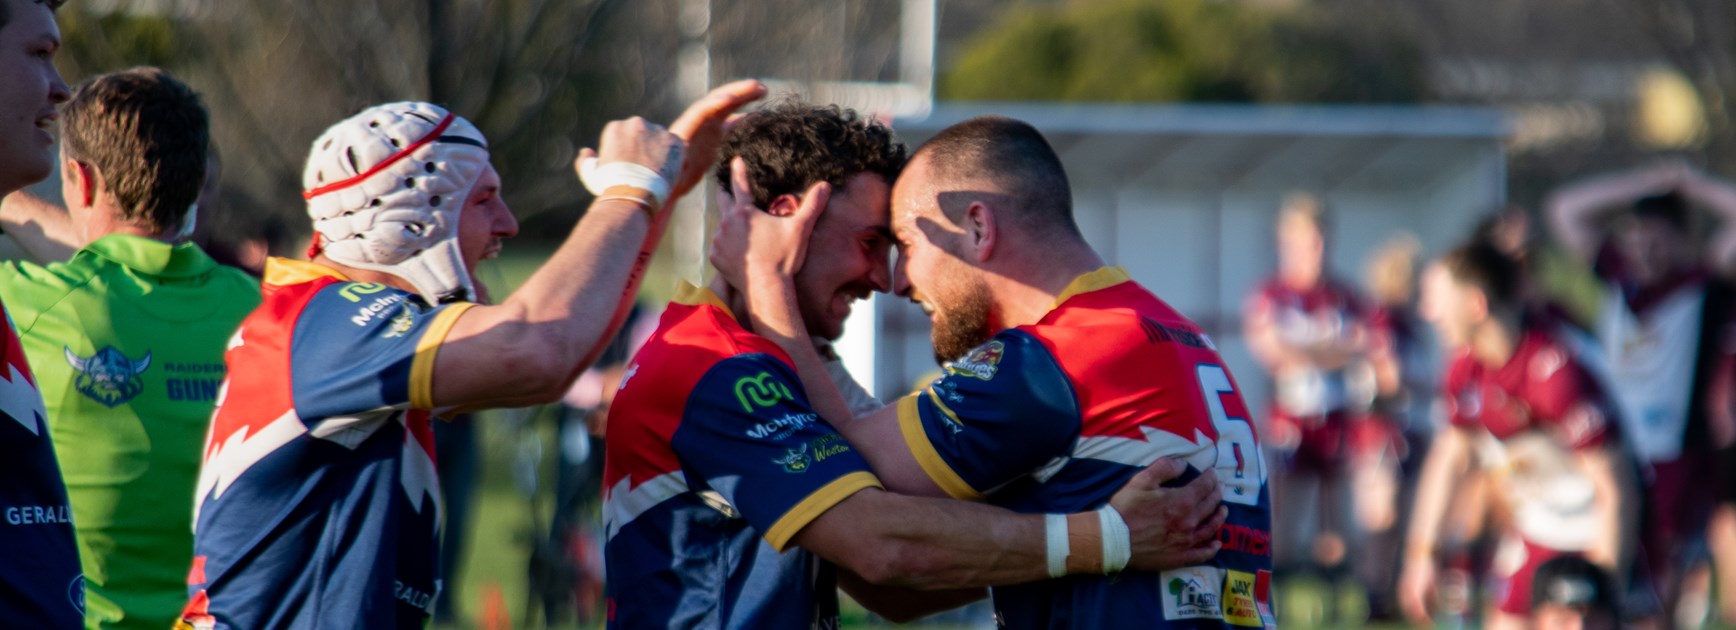 Canberra Raiders Cup: Week One Finals Wrap